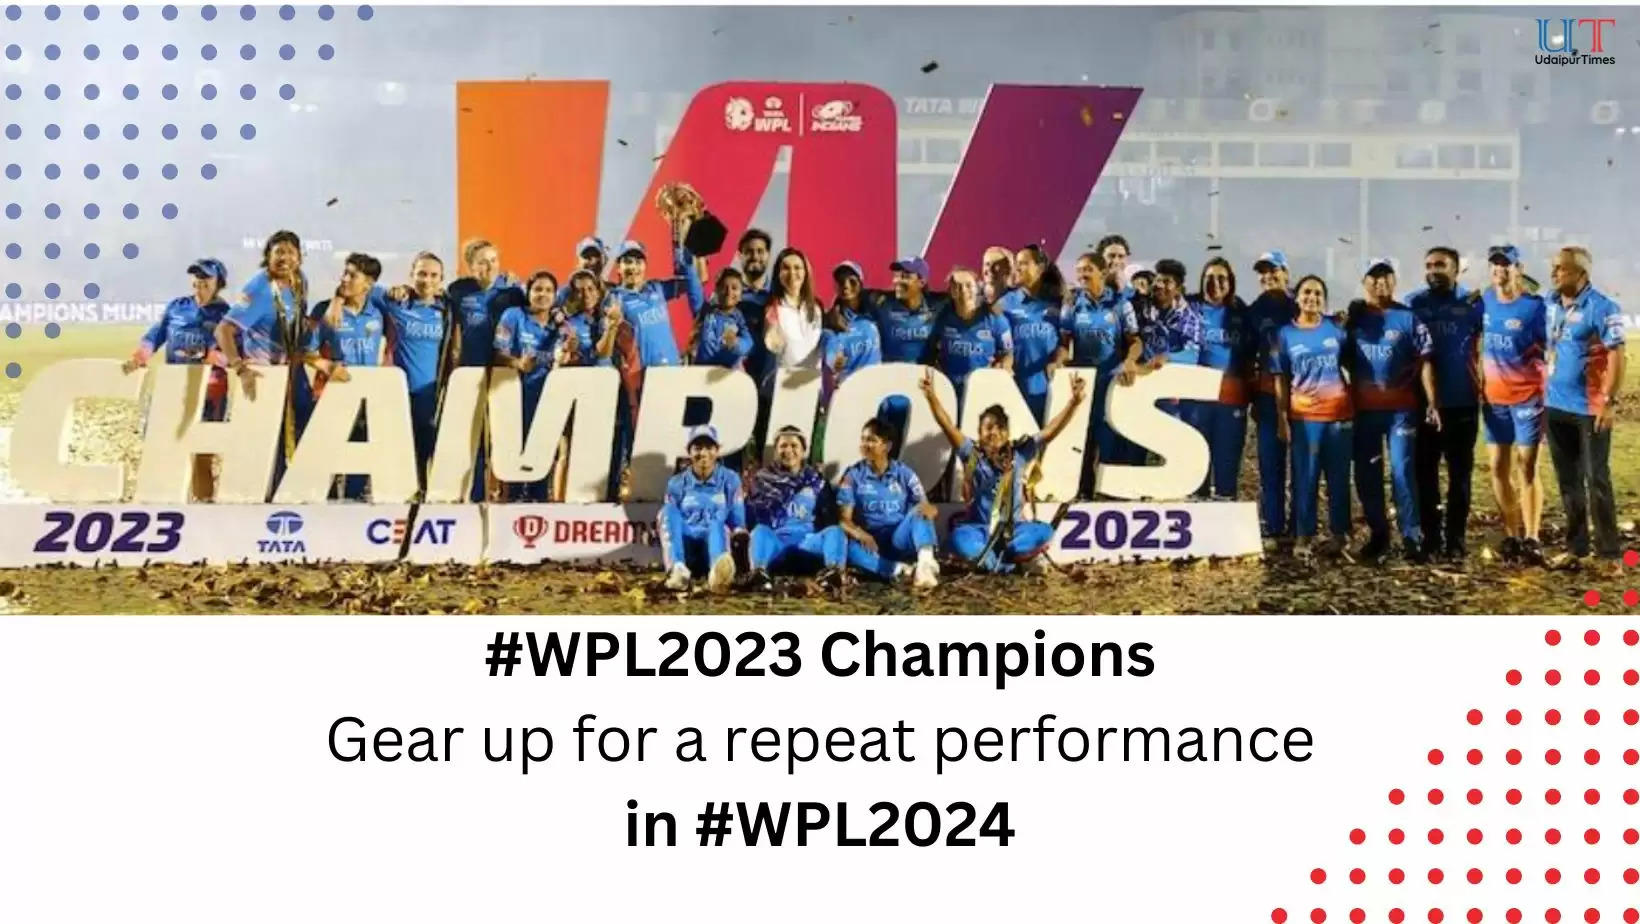 WPL 2023 Champions Mumbai Indians gear up for a repeat performance in WPL 2024 Harmanpreet Kaur